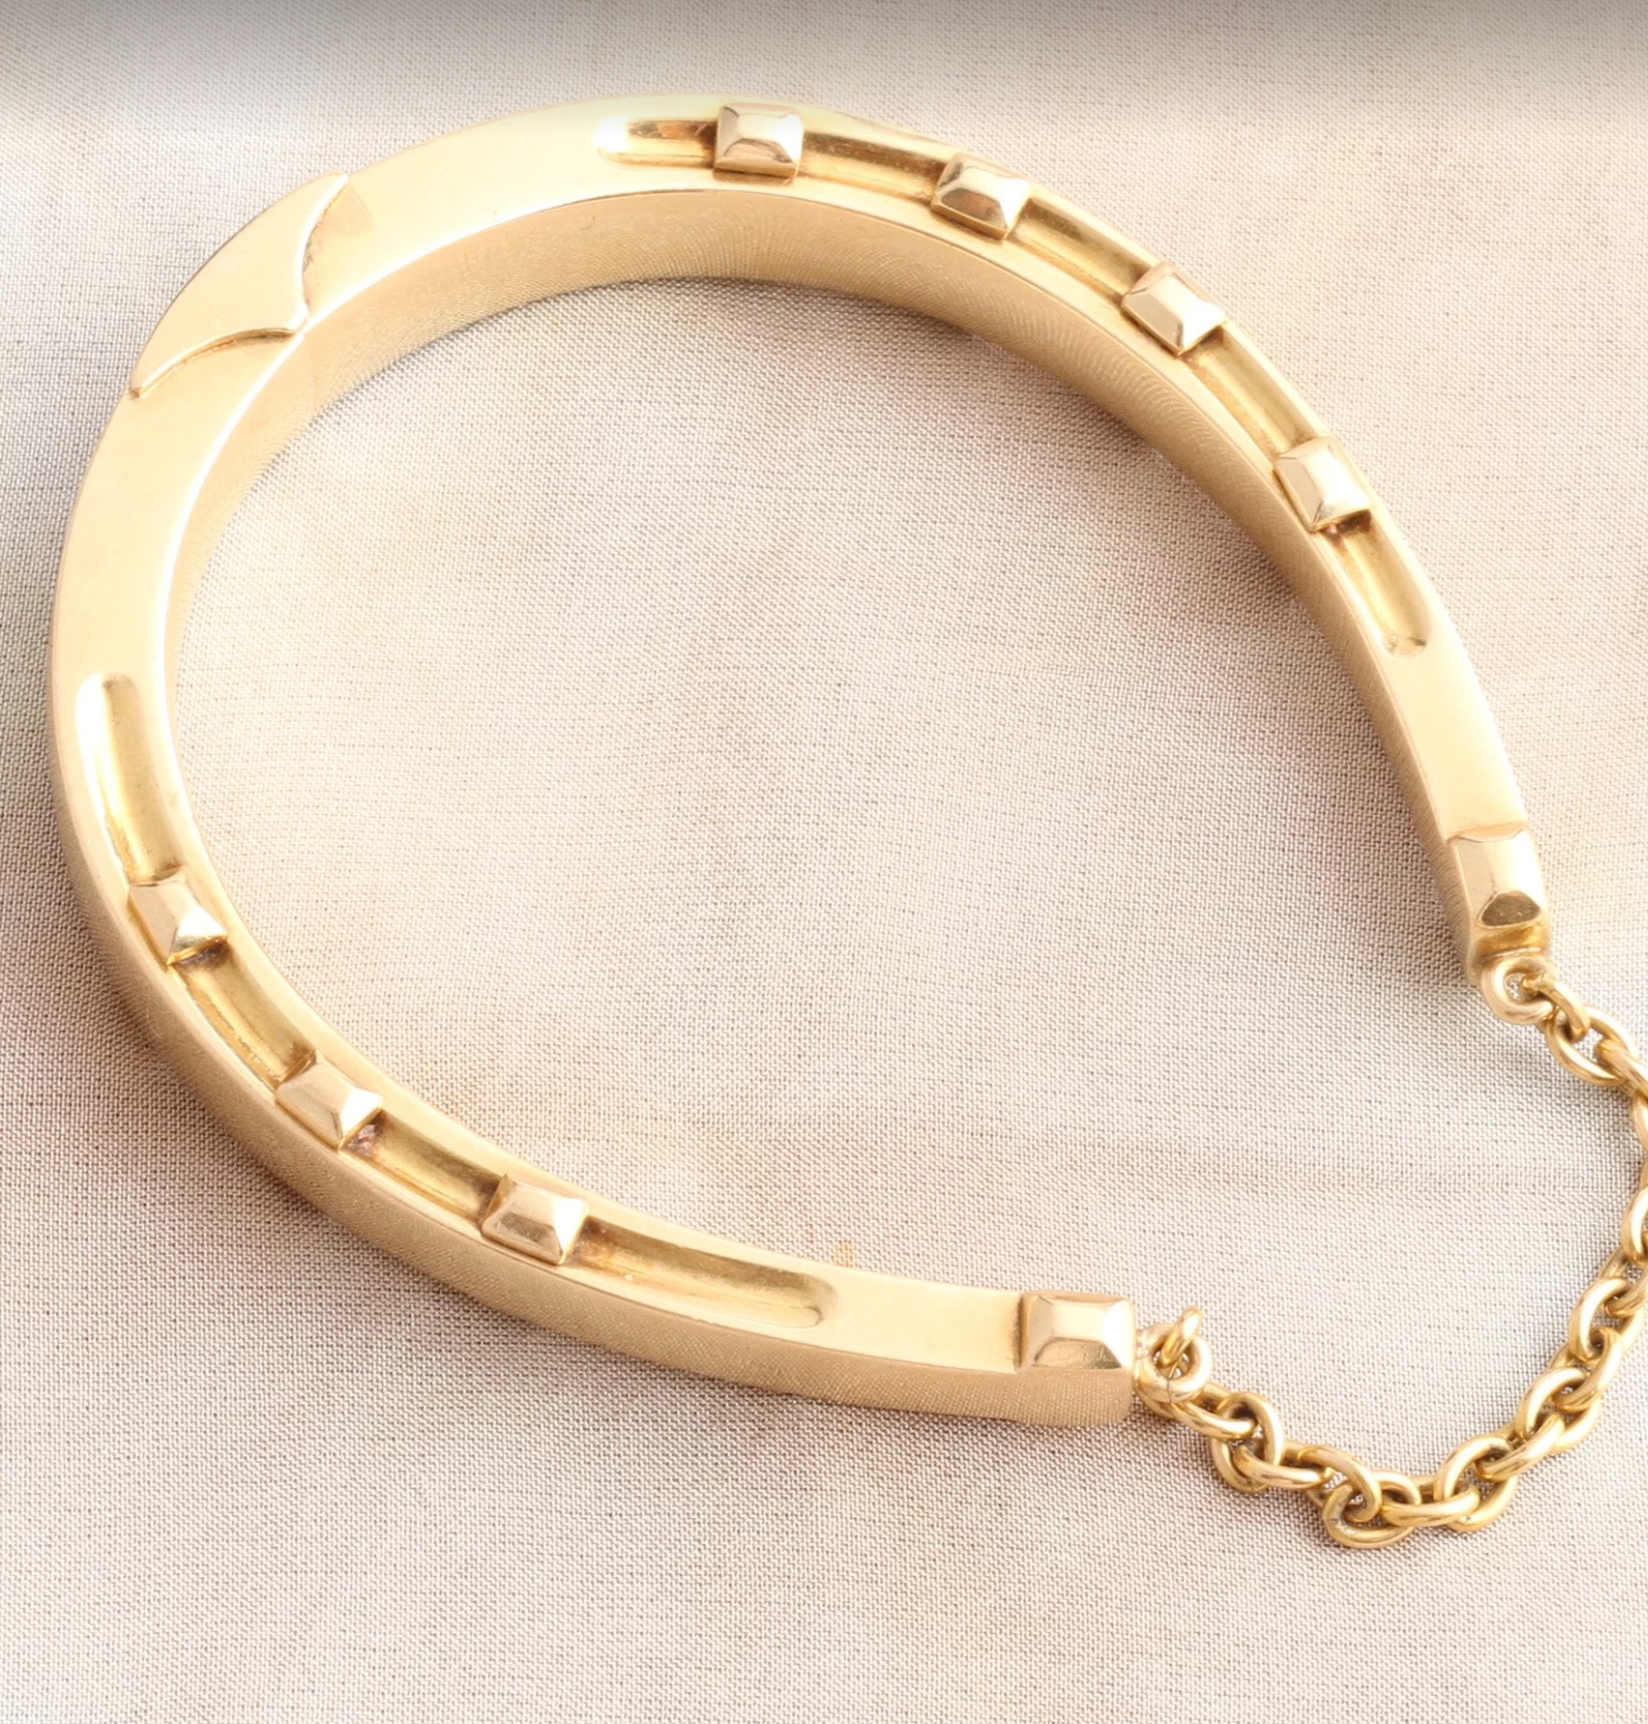 Horseshoes were all the range in late Victorian England. But they were worn more as a nod to the sport (although, they certainly never lost that lucky charm status)  From the Erica Weiner Antique Jewelry Archive. 